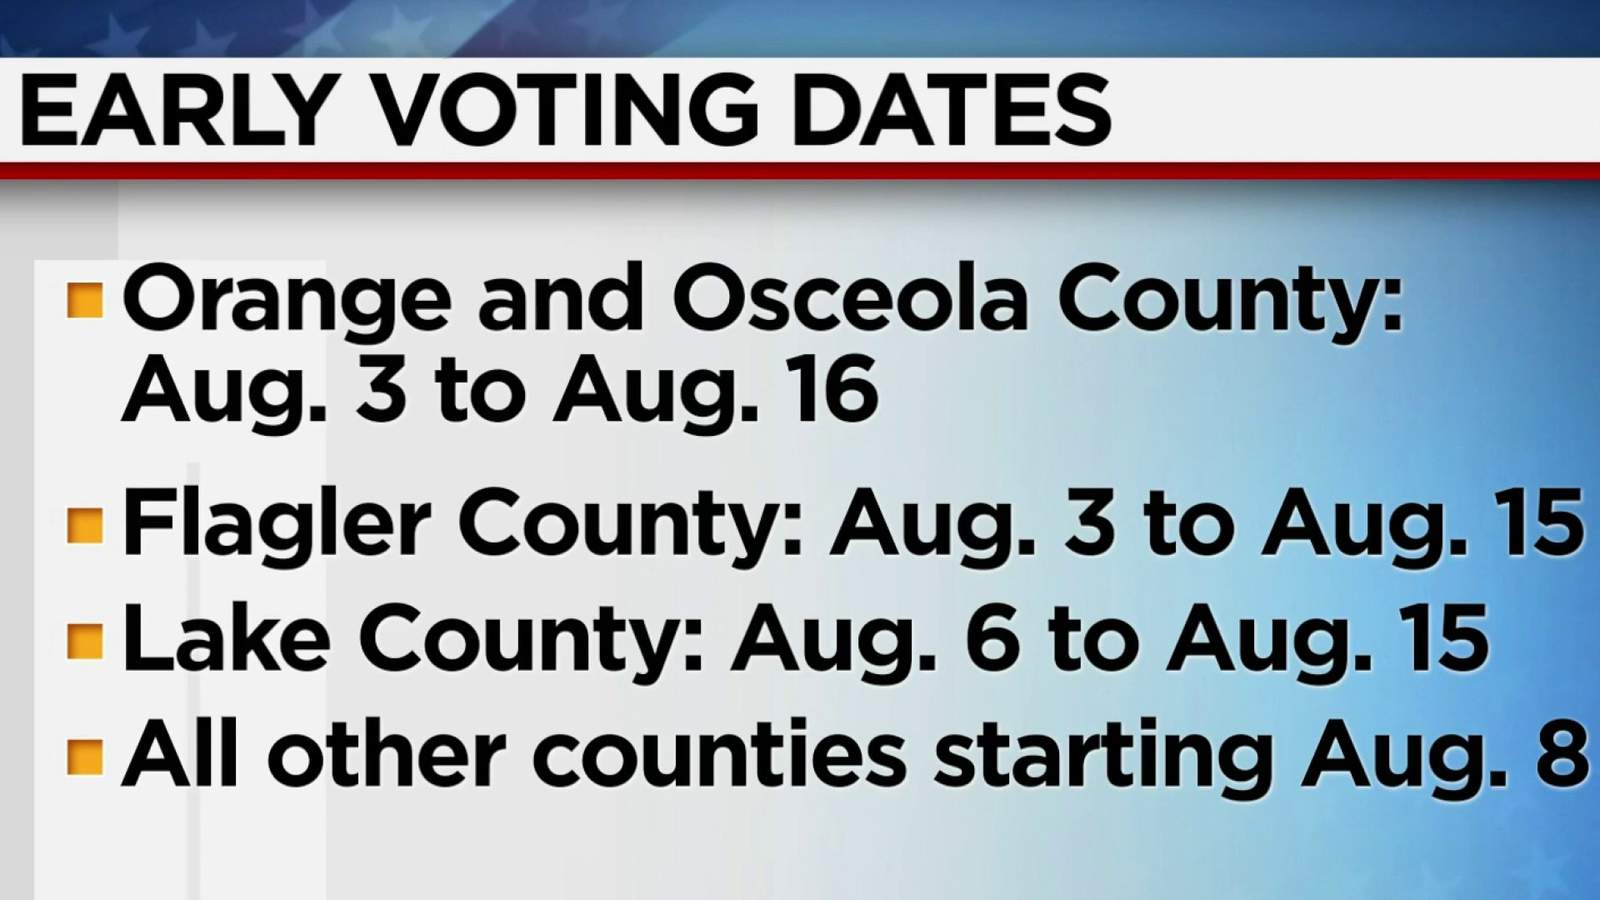 Here’s when early voting will take place in Central Florida counties